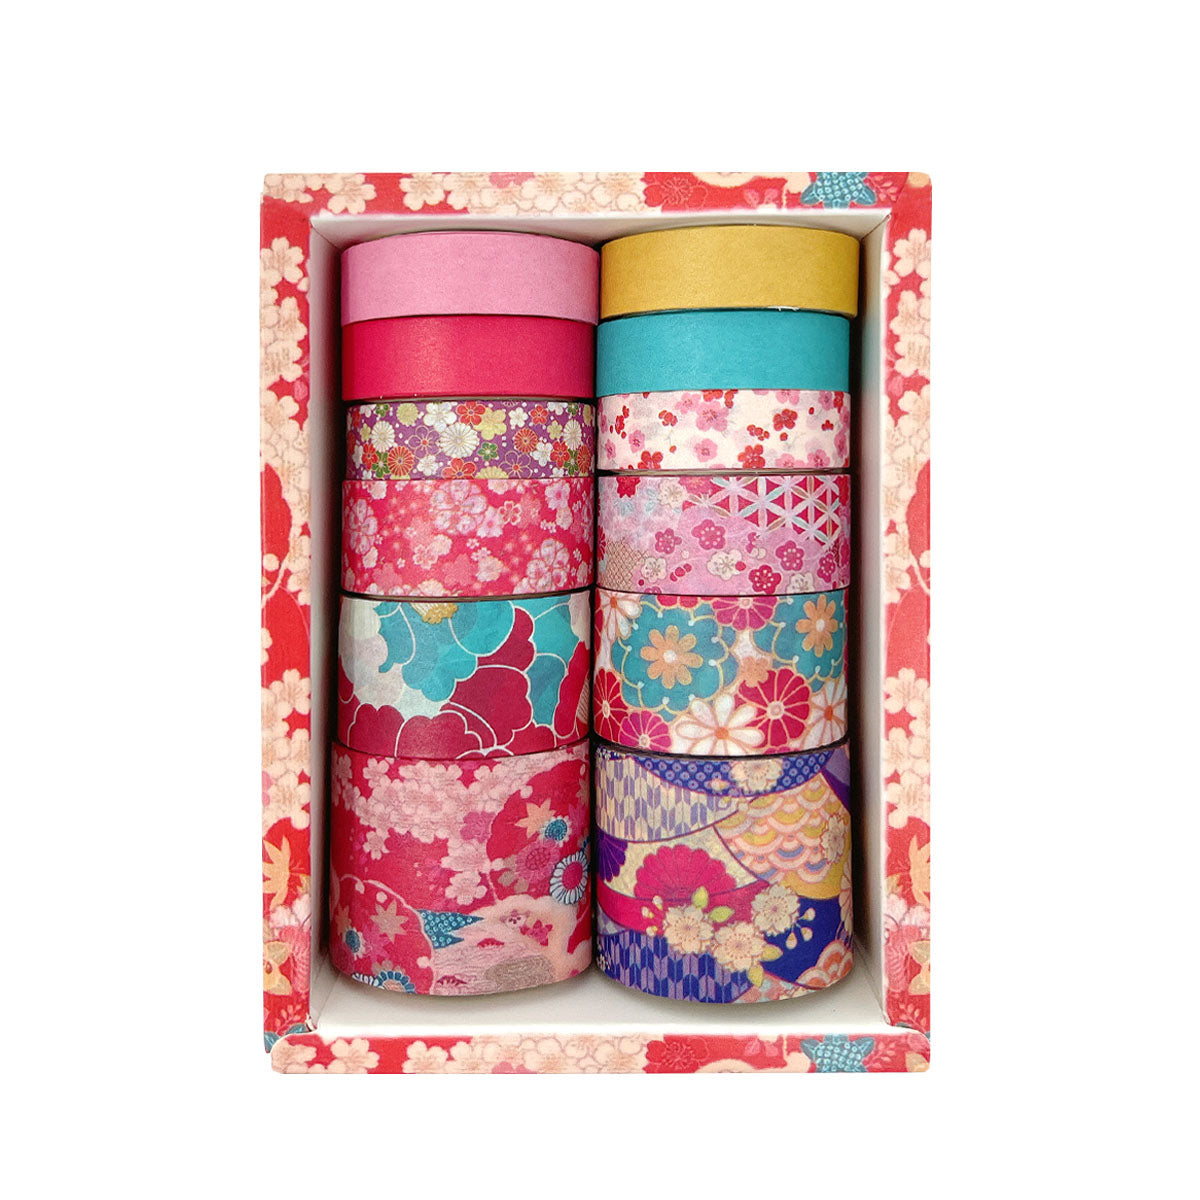 Craft Sensations Washi Tape Set 40 Rolls of 3 Metres, Decorative Masking  Tape in 40 Unique Designs for Crafts, Stationery, Diaries, Adhesive Rolls  with Handy Storage Box : : Home & Kitchen